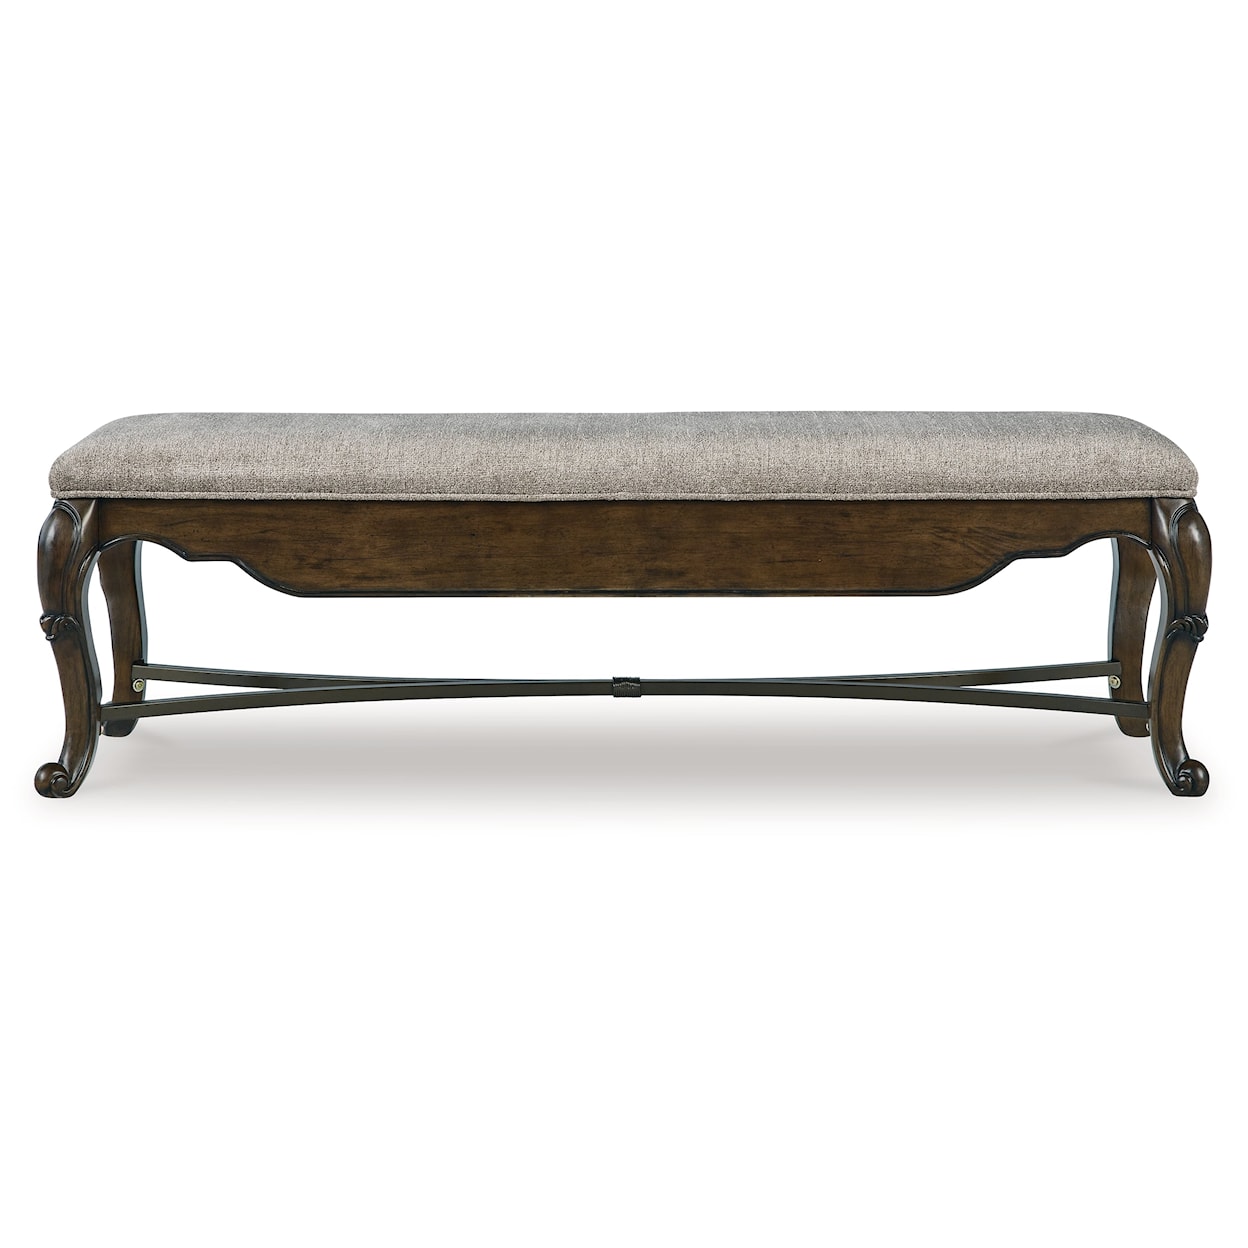 Signature Design by Ashley Maylee Upholstered Storage Bench